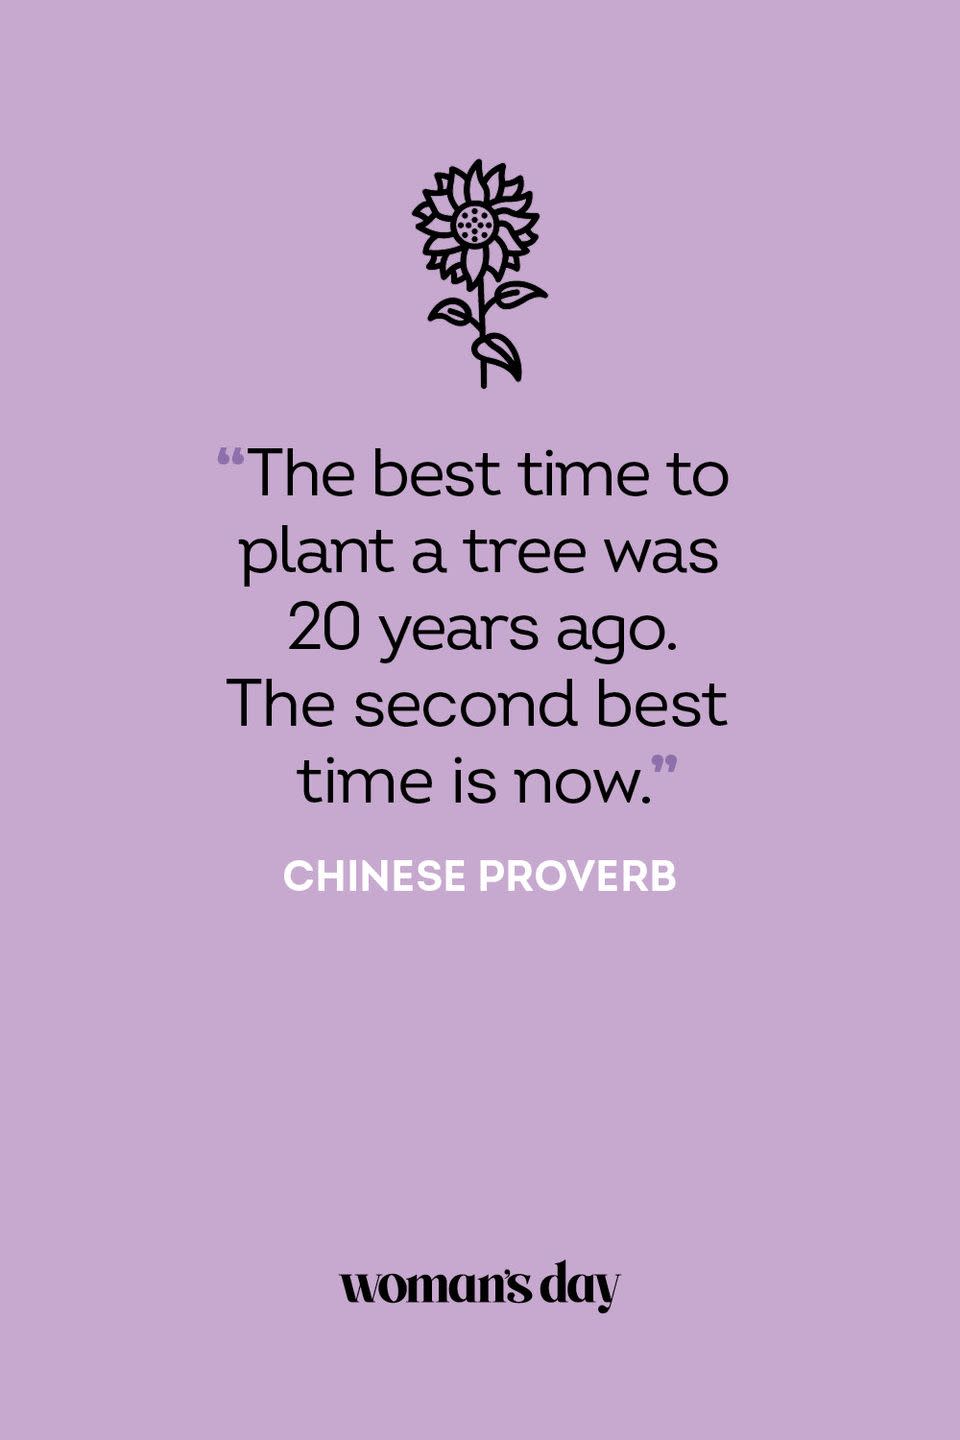 Chinese Proverb